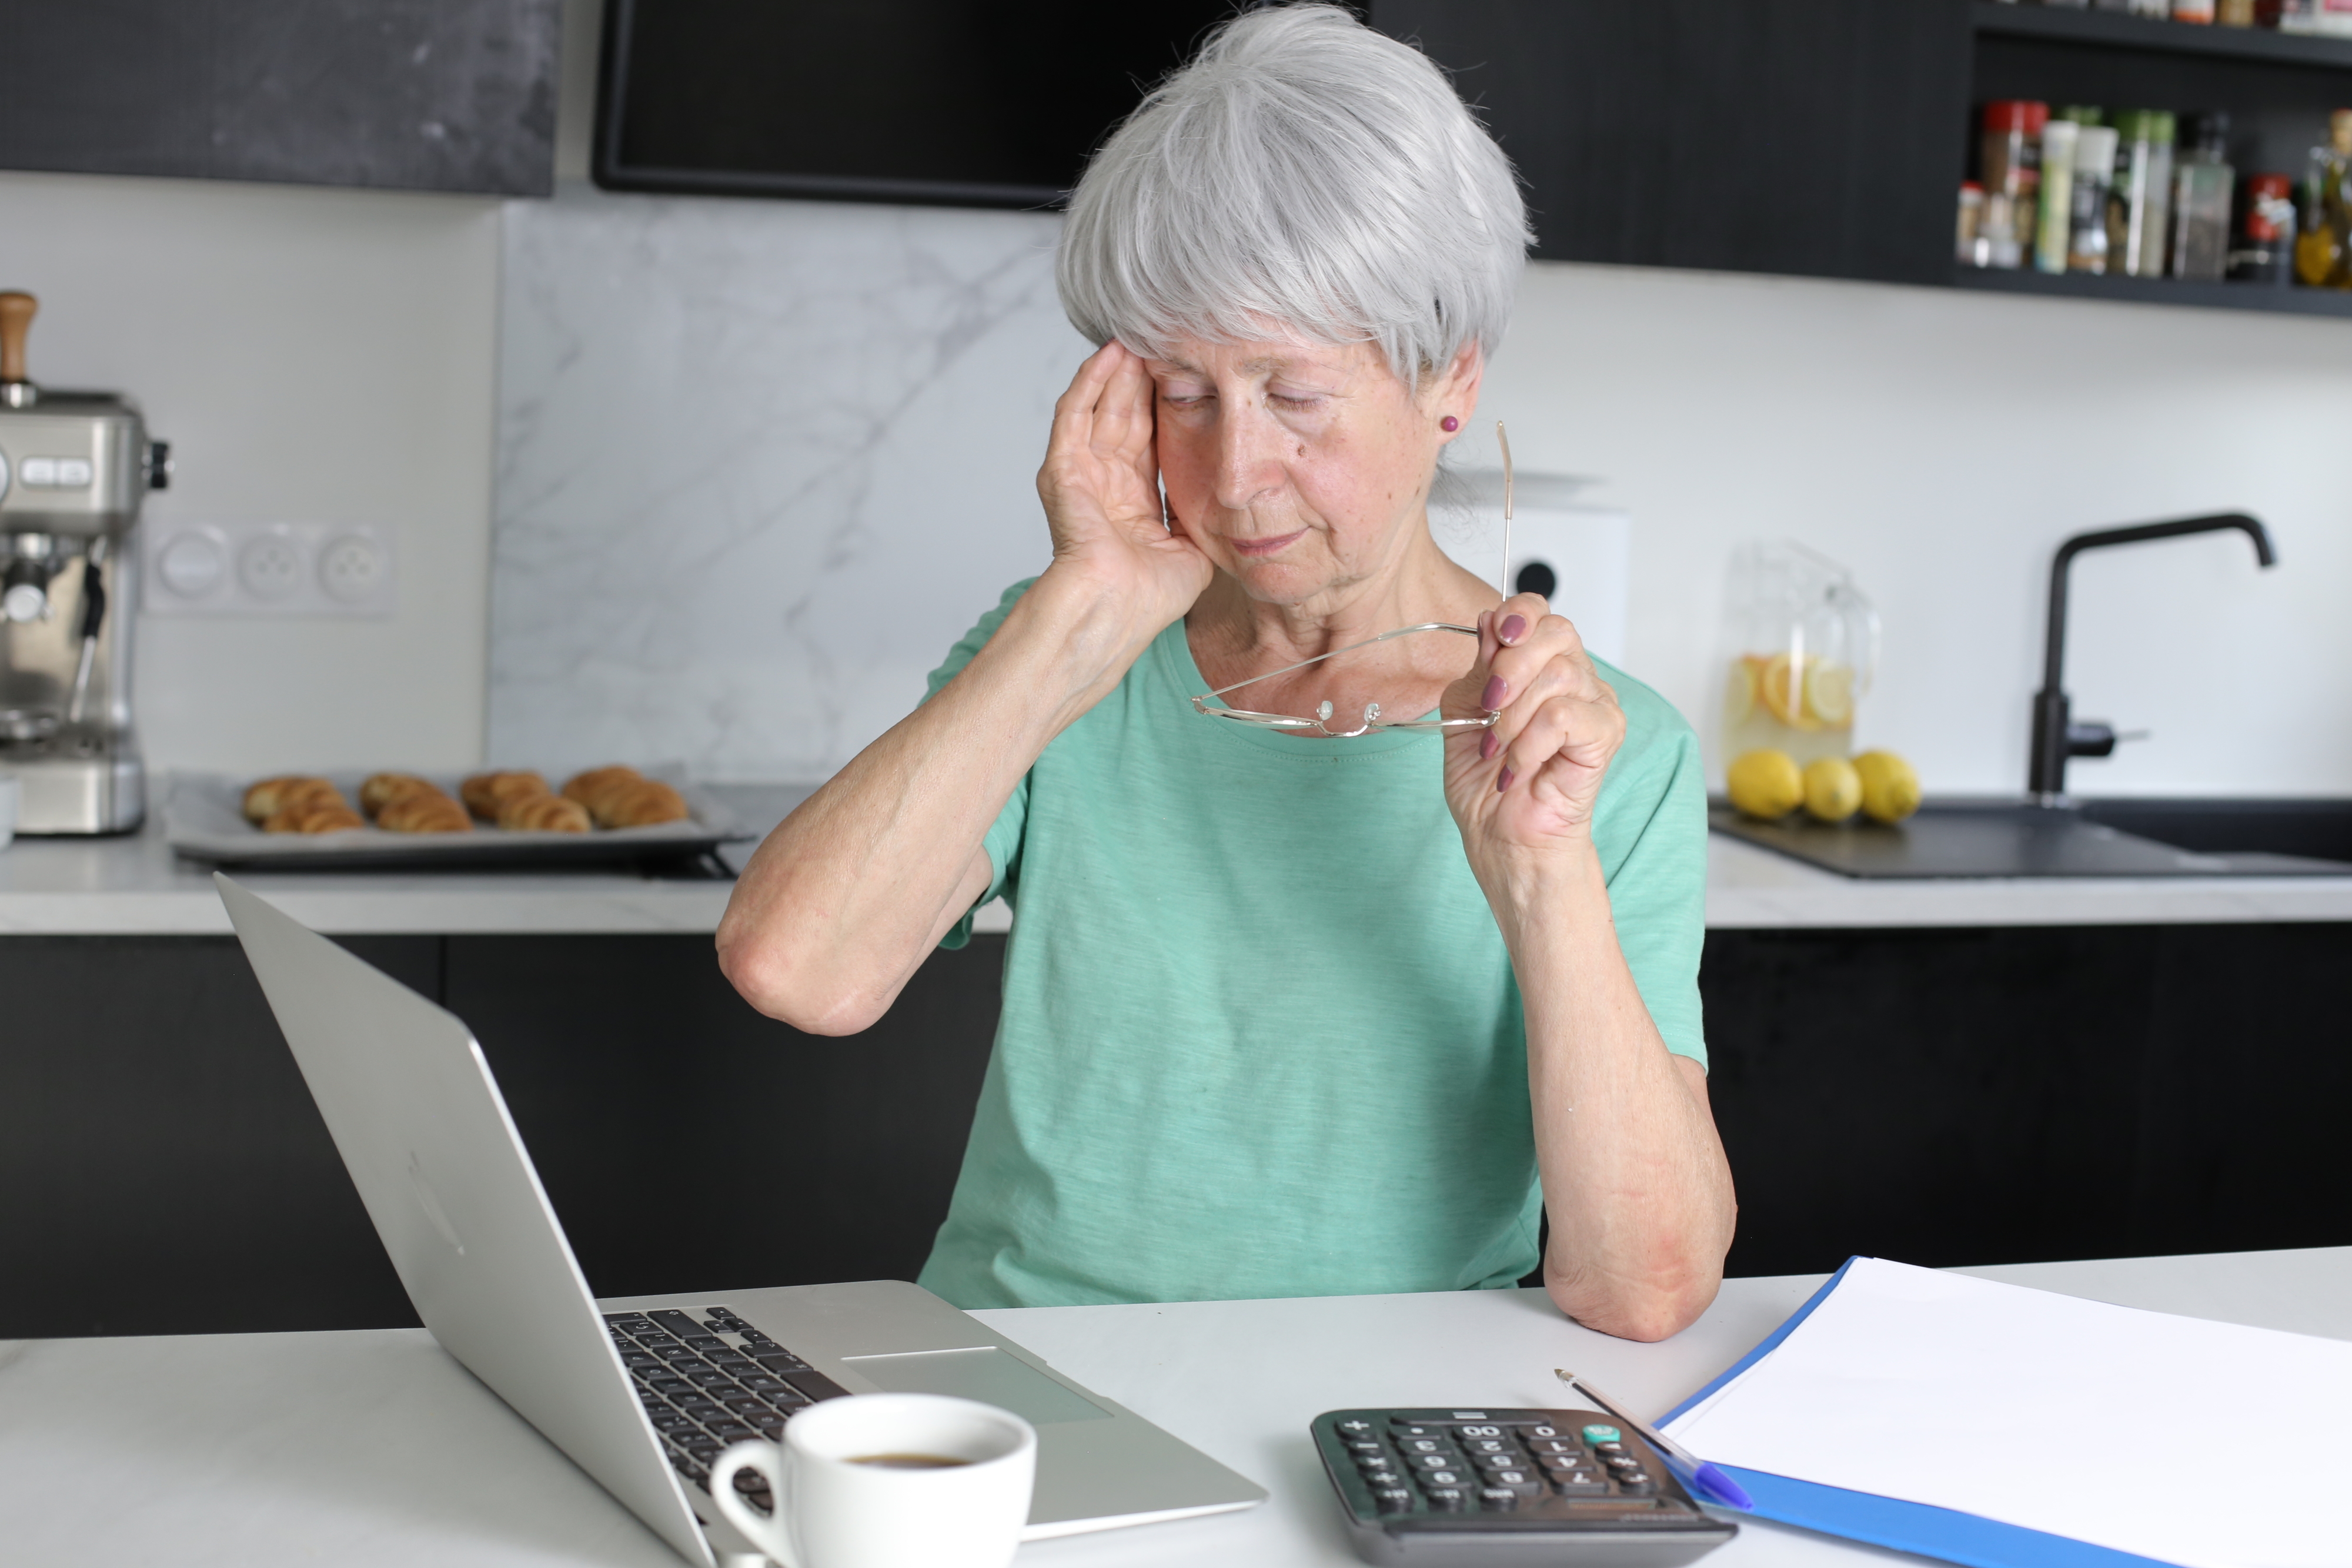 Older woman with glasses appears frustrated or tired while working on a laptop in a kitchen setting